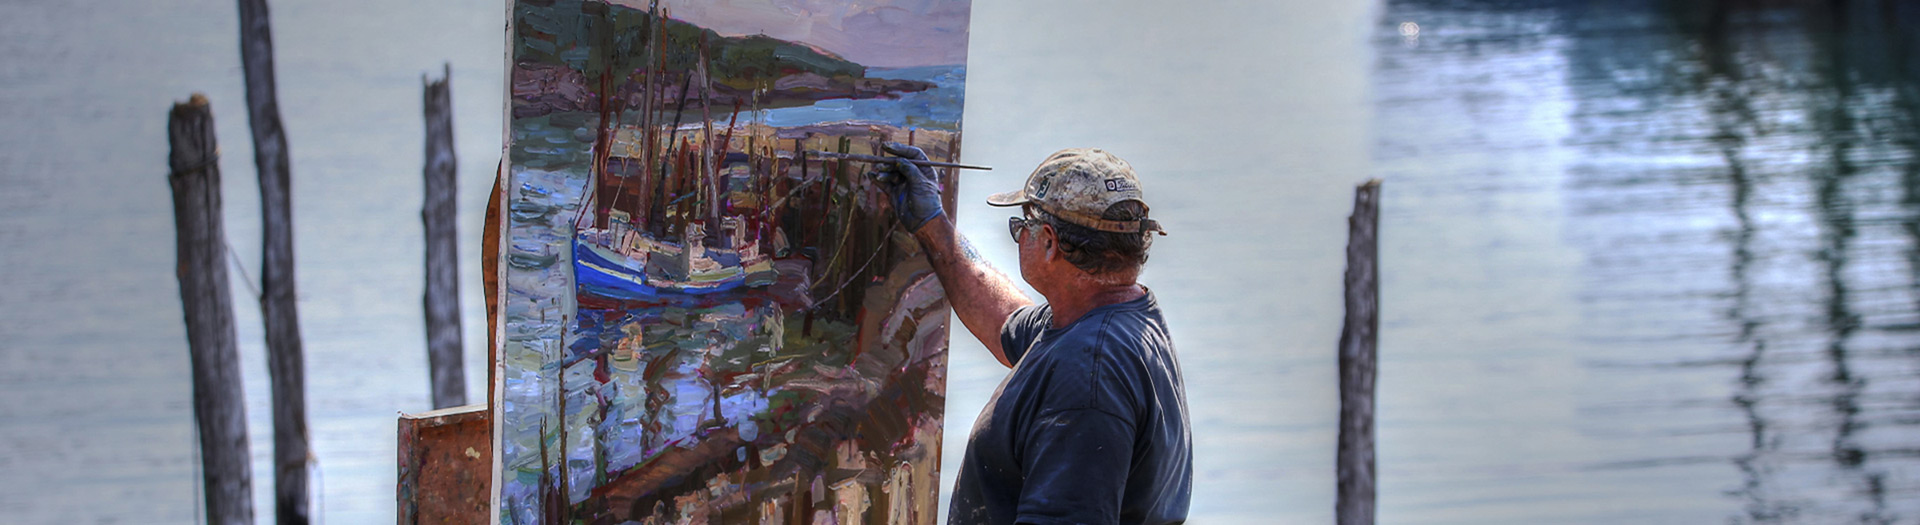 Painting the waterfront scenery in Whale Cove